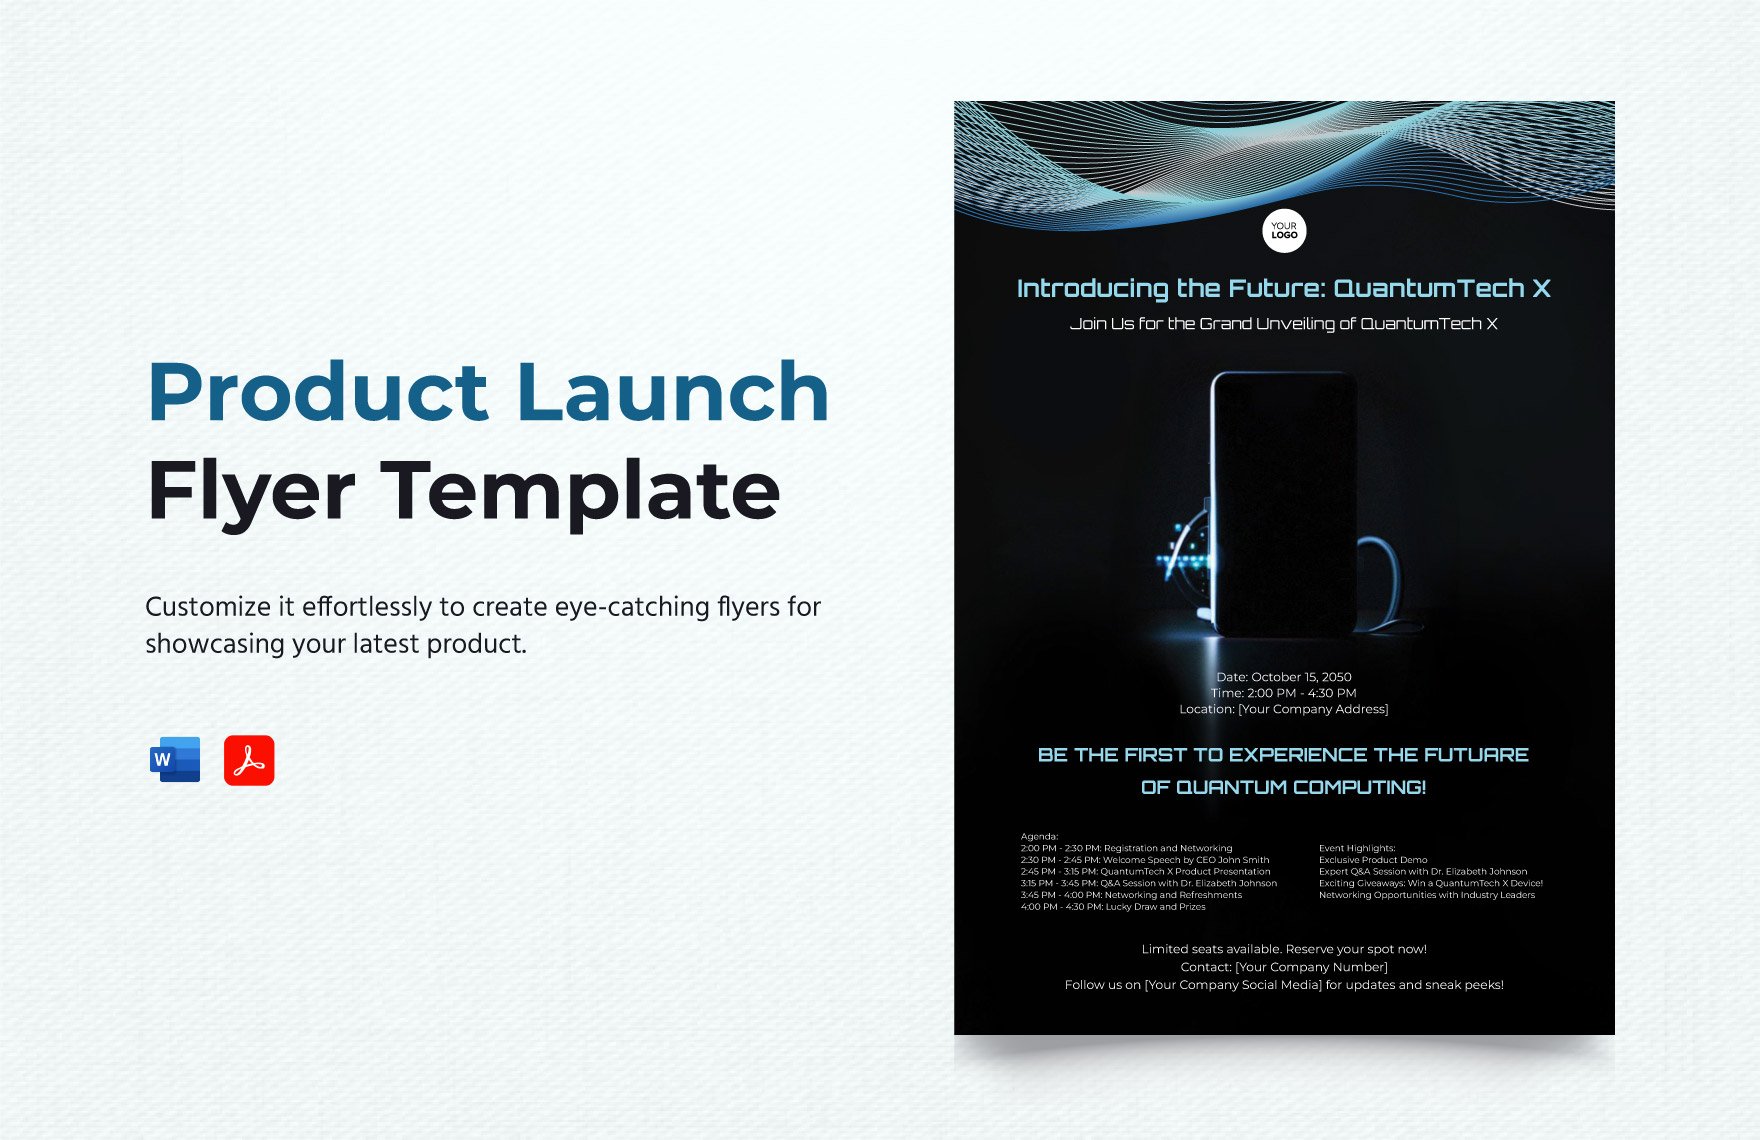 Product Launch Flyer Template